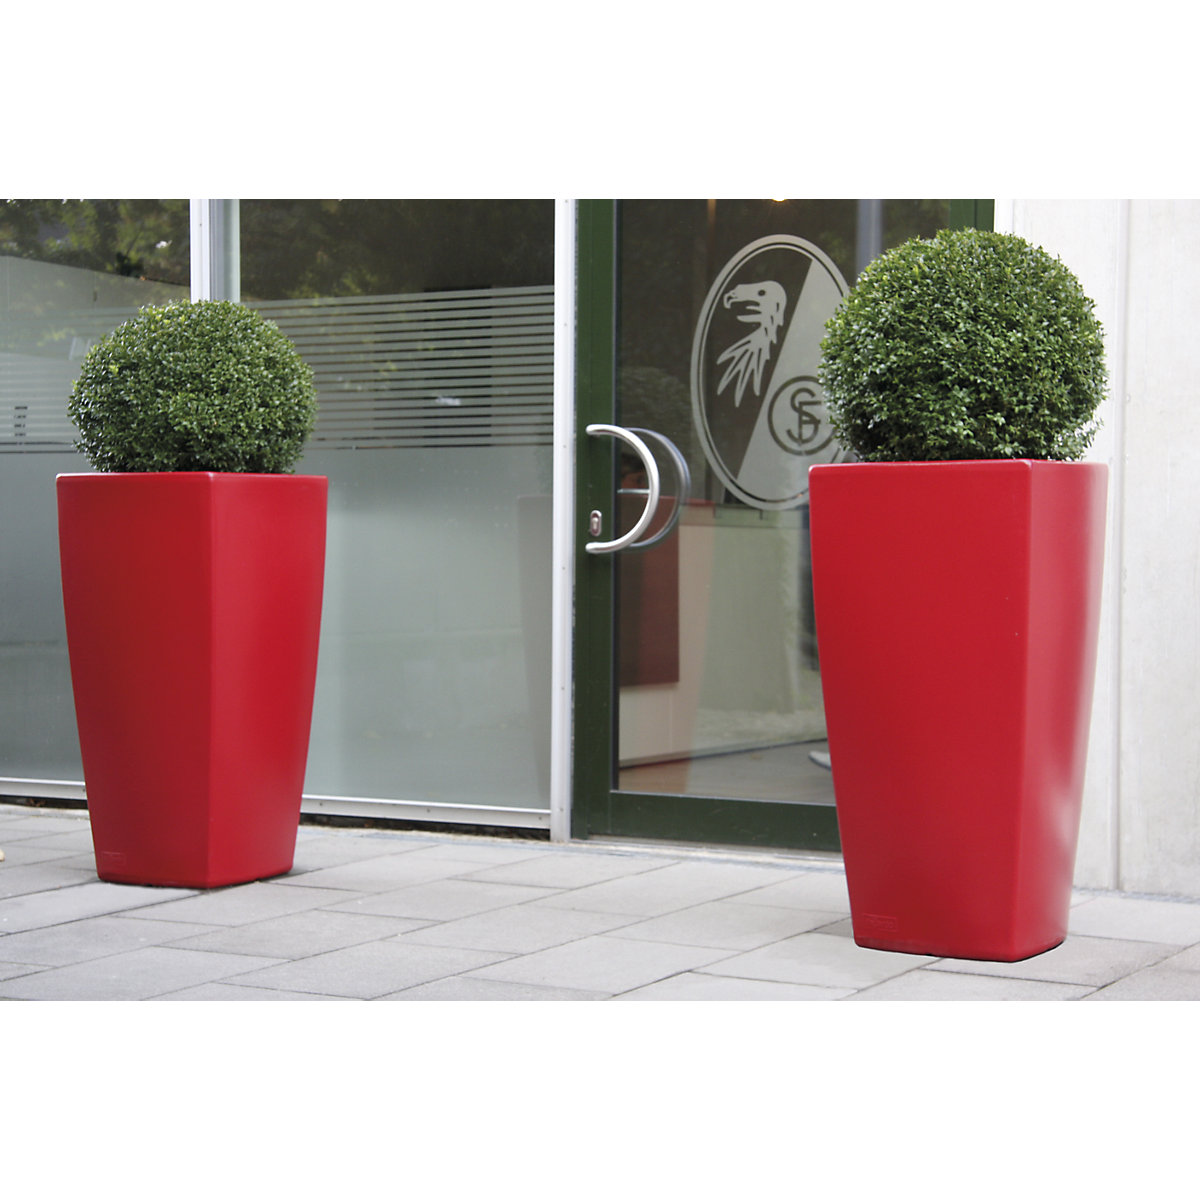 Plant container – DEGARDO, TREVIA IV, HxWxD 900 x 470 x 470 mm, ruby red-2